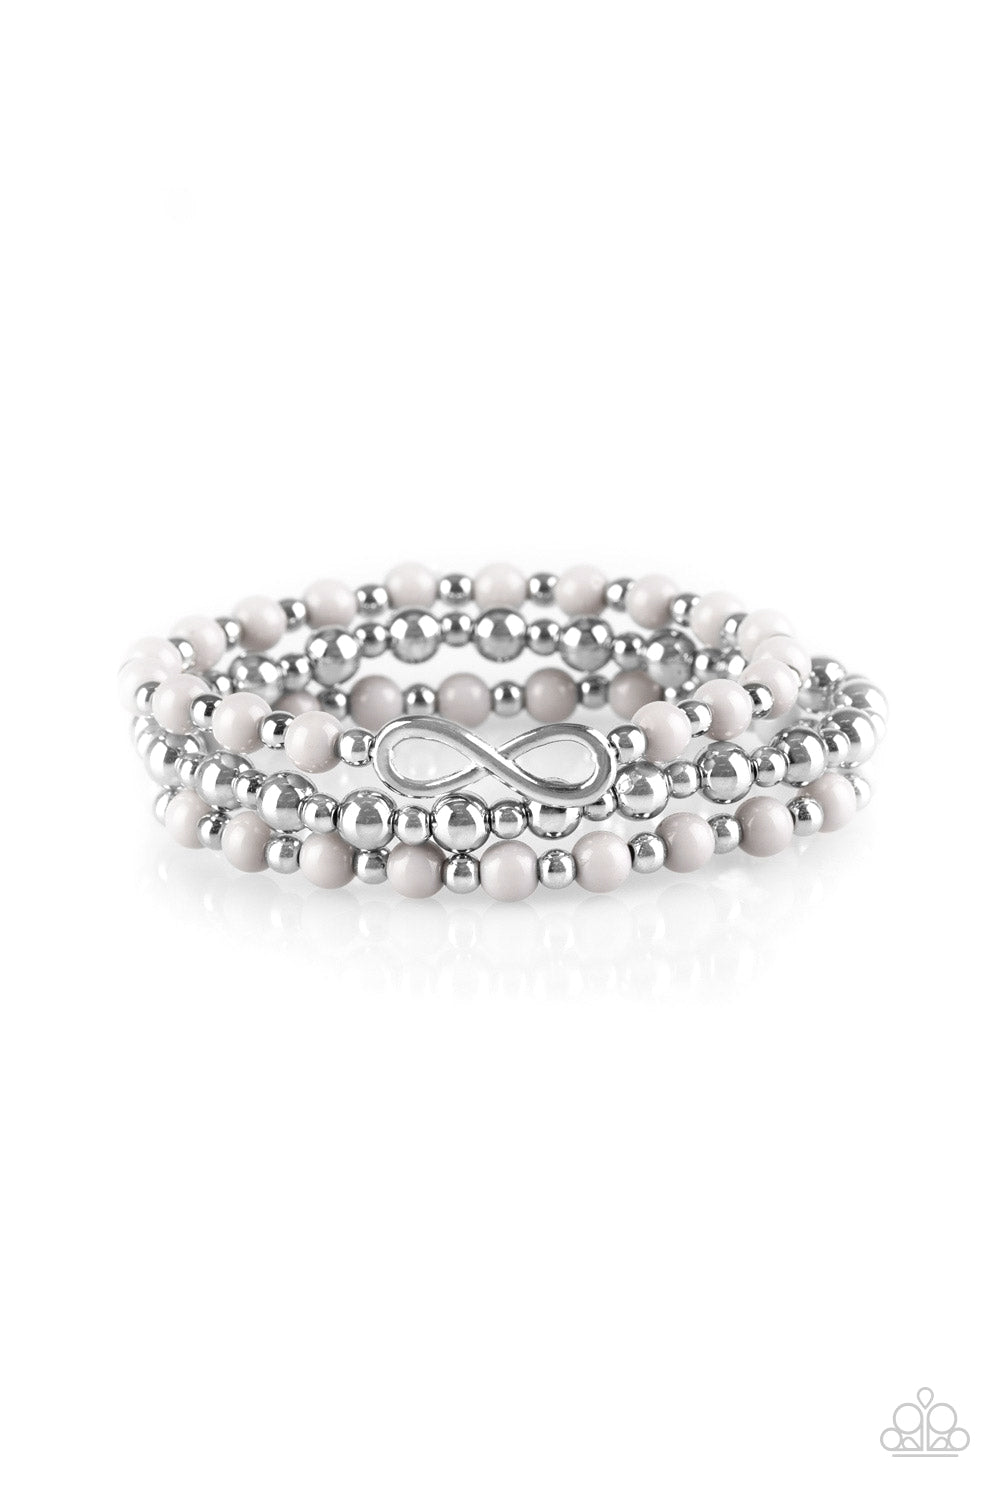 Immeasurably Infinite - Silver - Bella Bling by Natalie